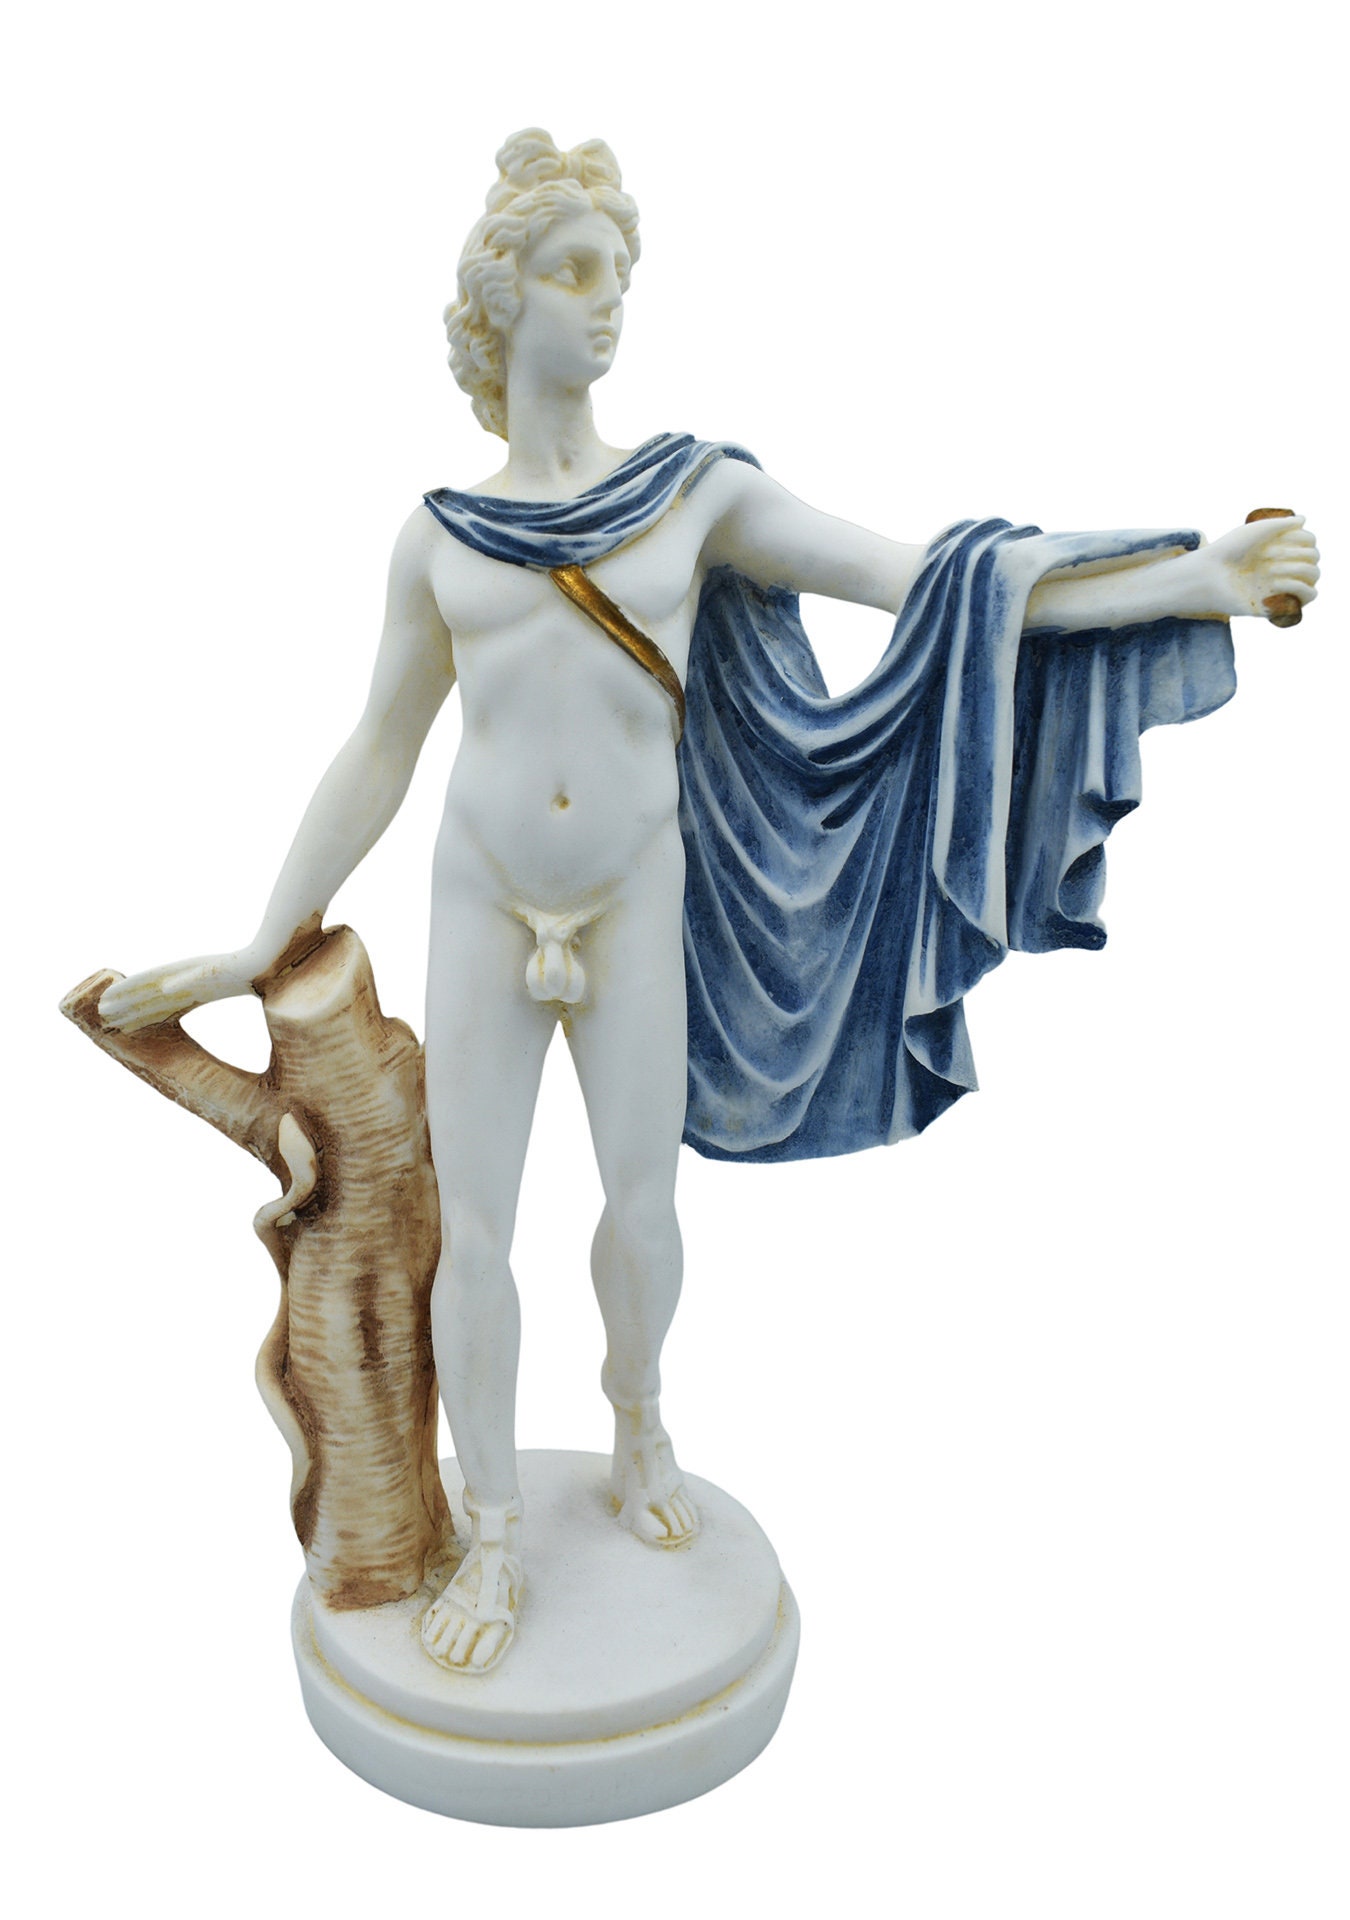 Apollo Belvedere Statue, Greek God of Sun, Music and Poetry, Handmade  Alabaster Sculpture, Greek Roman Mythology, 23cm-9.06in, FREE SHIPPING -   Canada